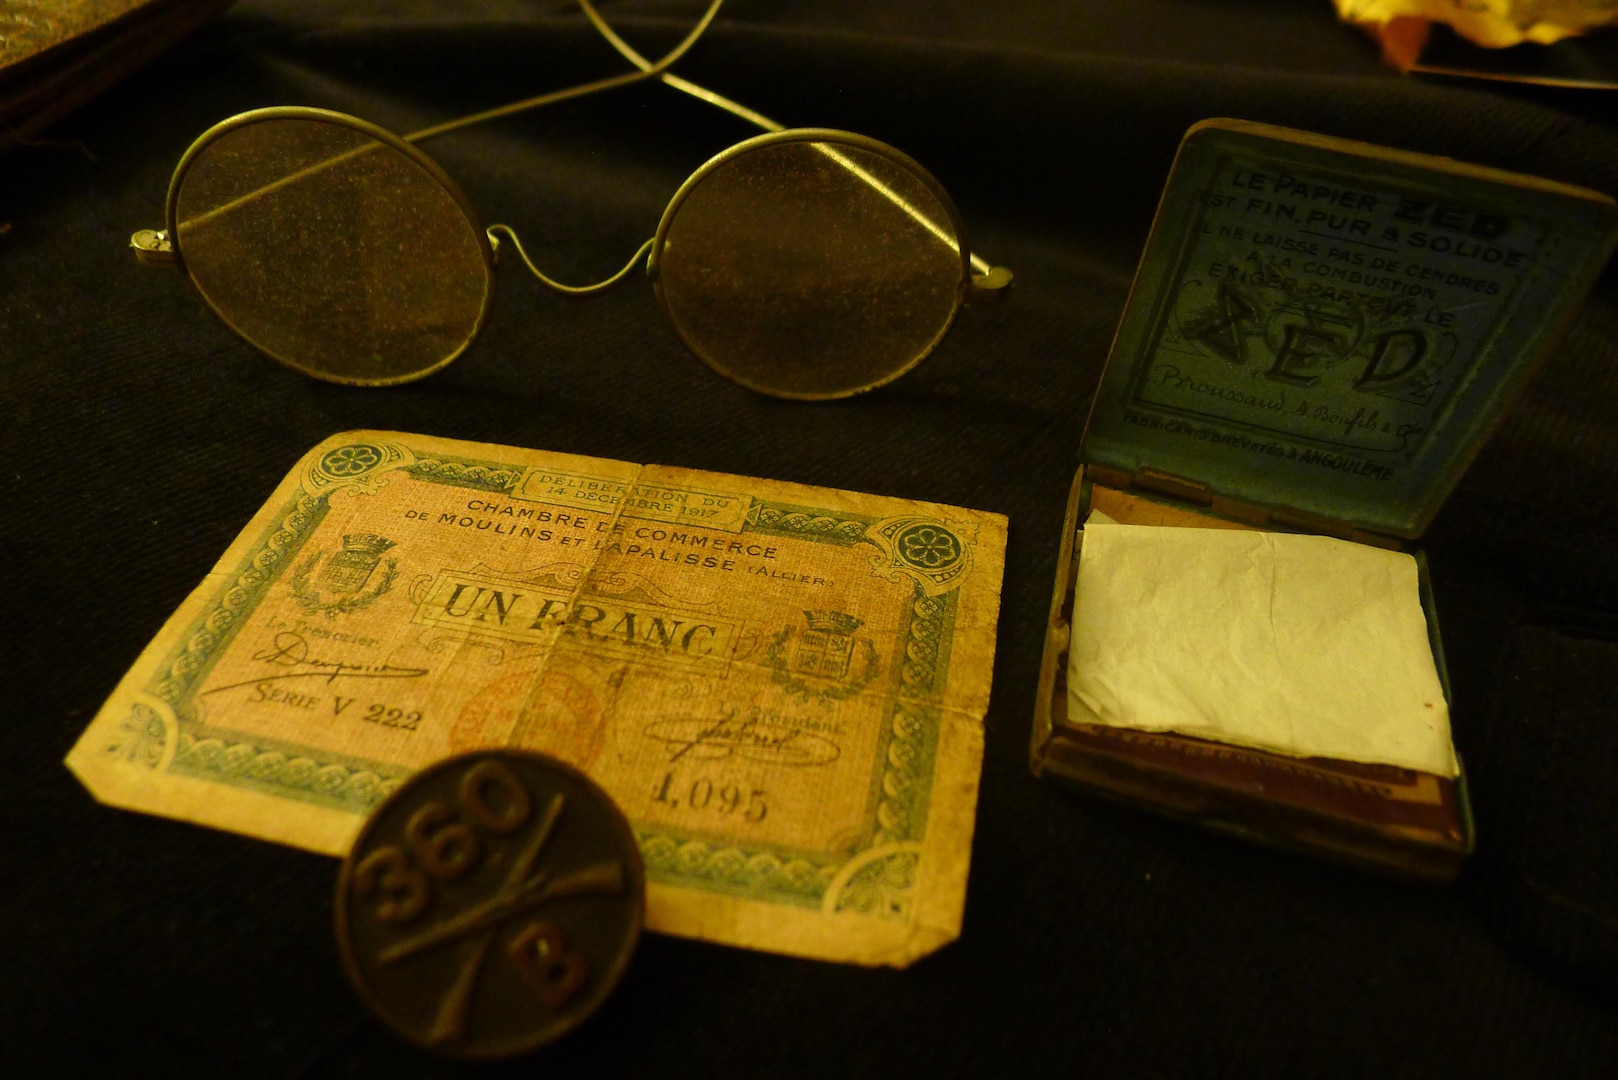 From bottom left: Items Sgt. Leon Bell brought home from WWI include a US Army 360th Infantry button, from his uniform coat; French provisional currency; wire-frame spectacles; and French cigarette rolling papers.